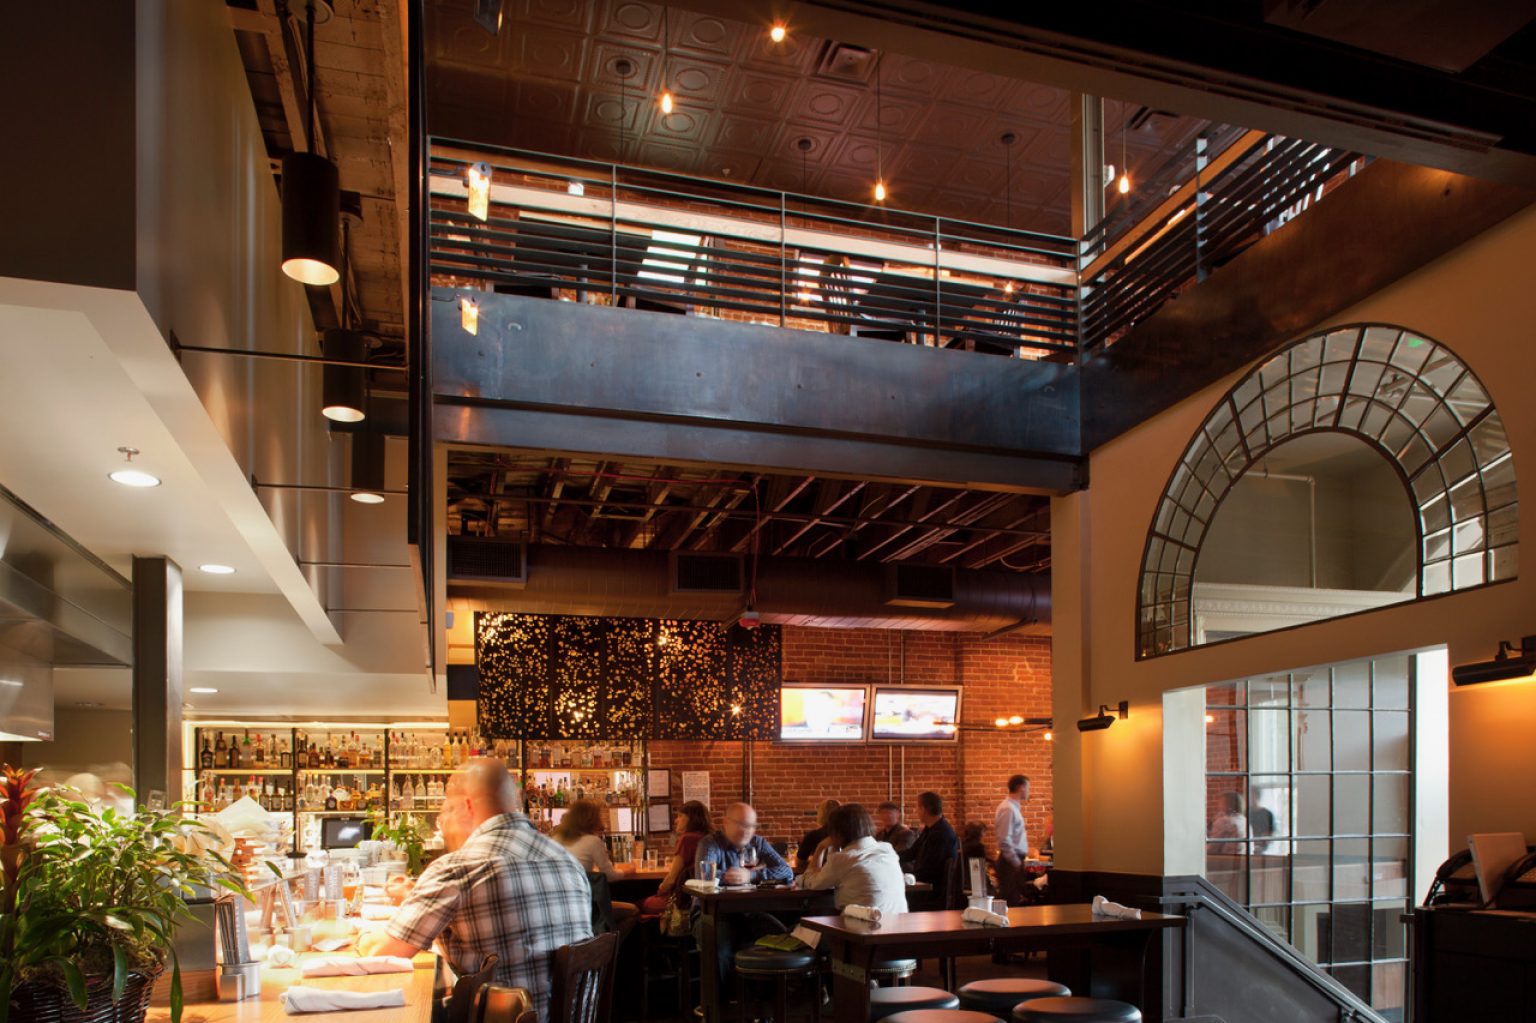 euclid hall bar and kitchen gastropub setting with